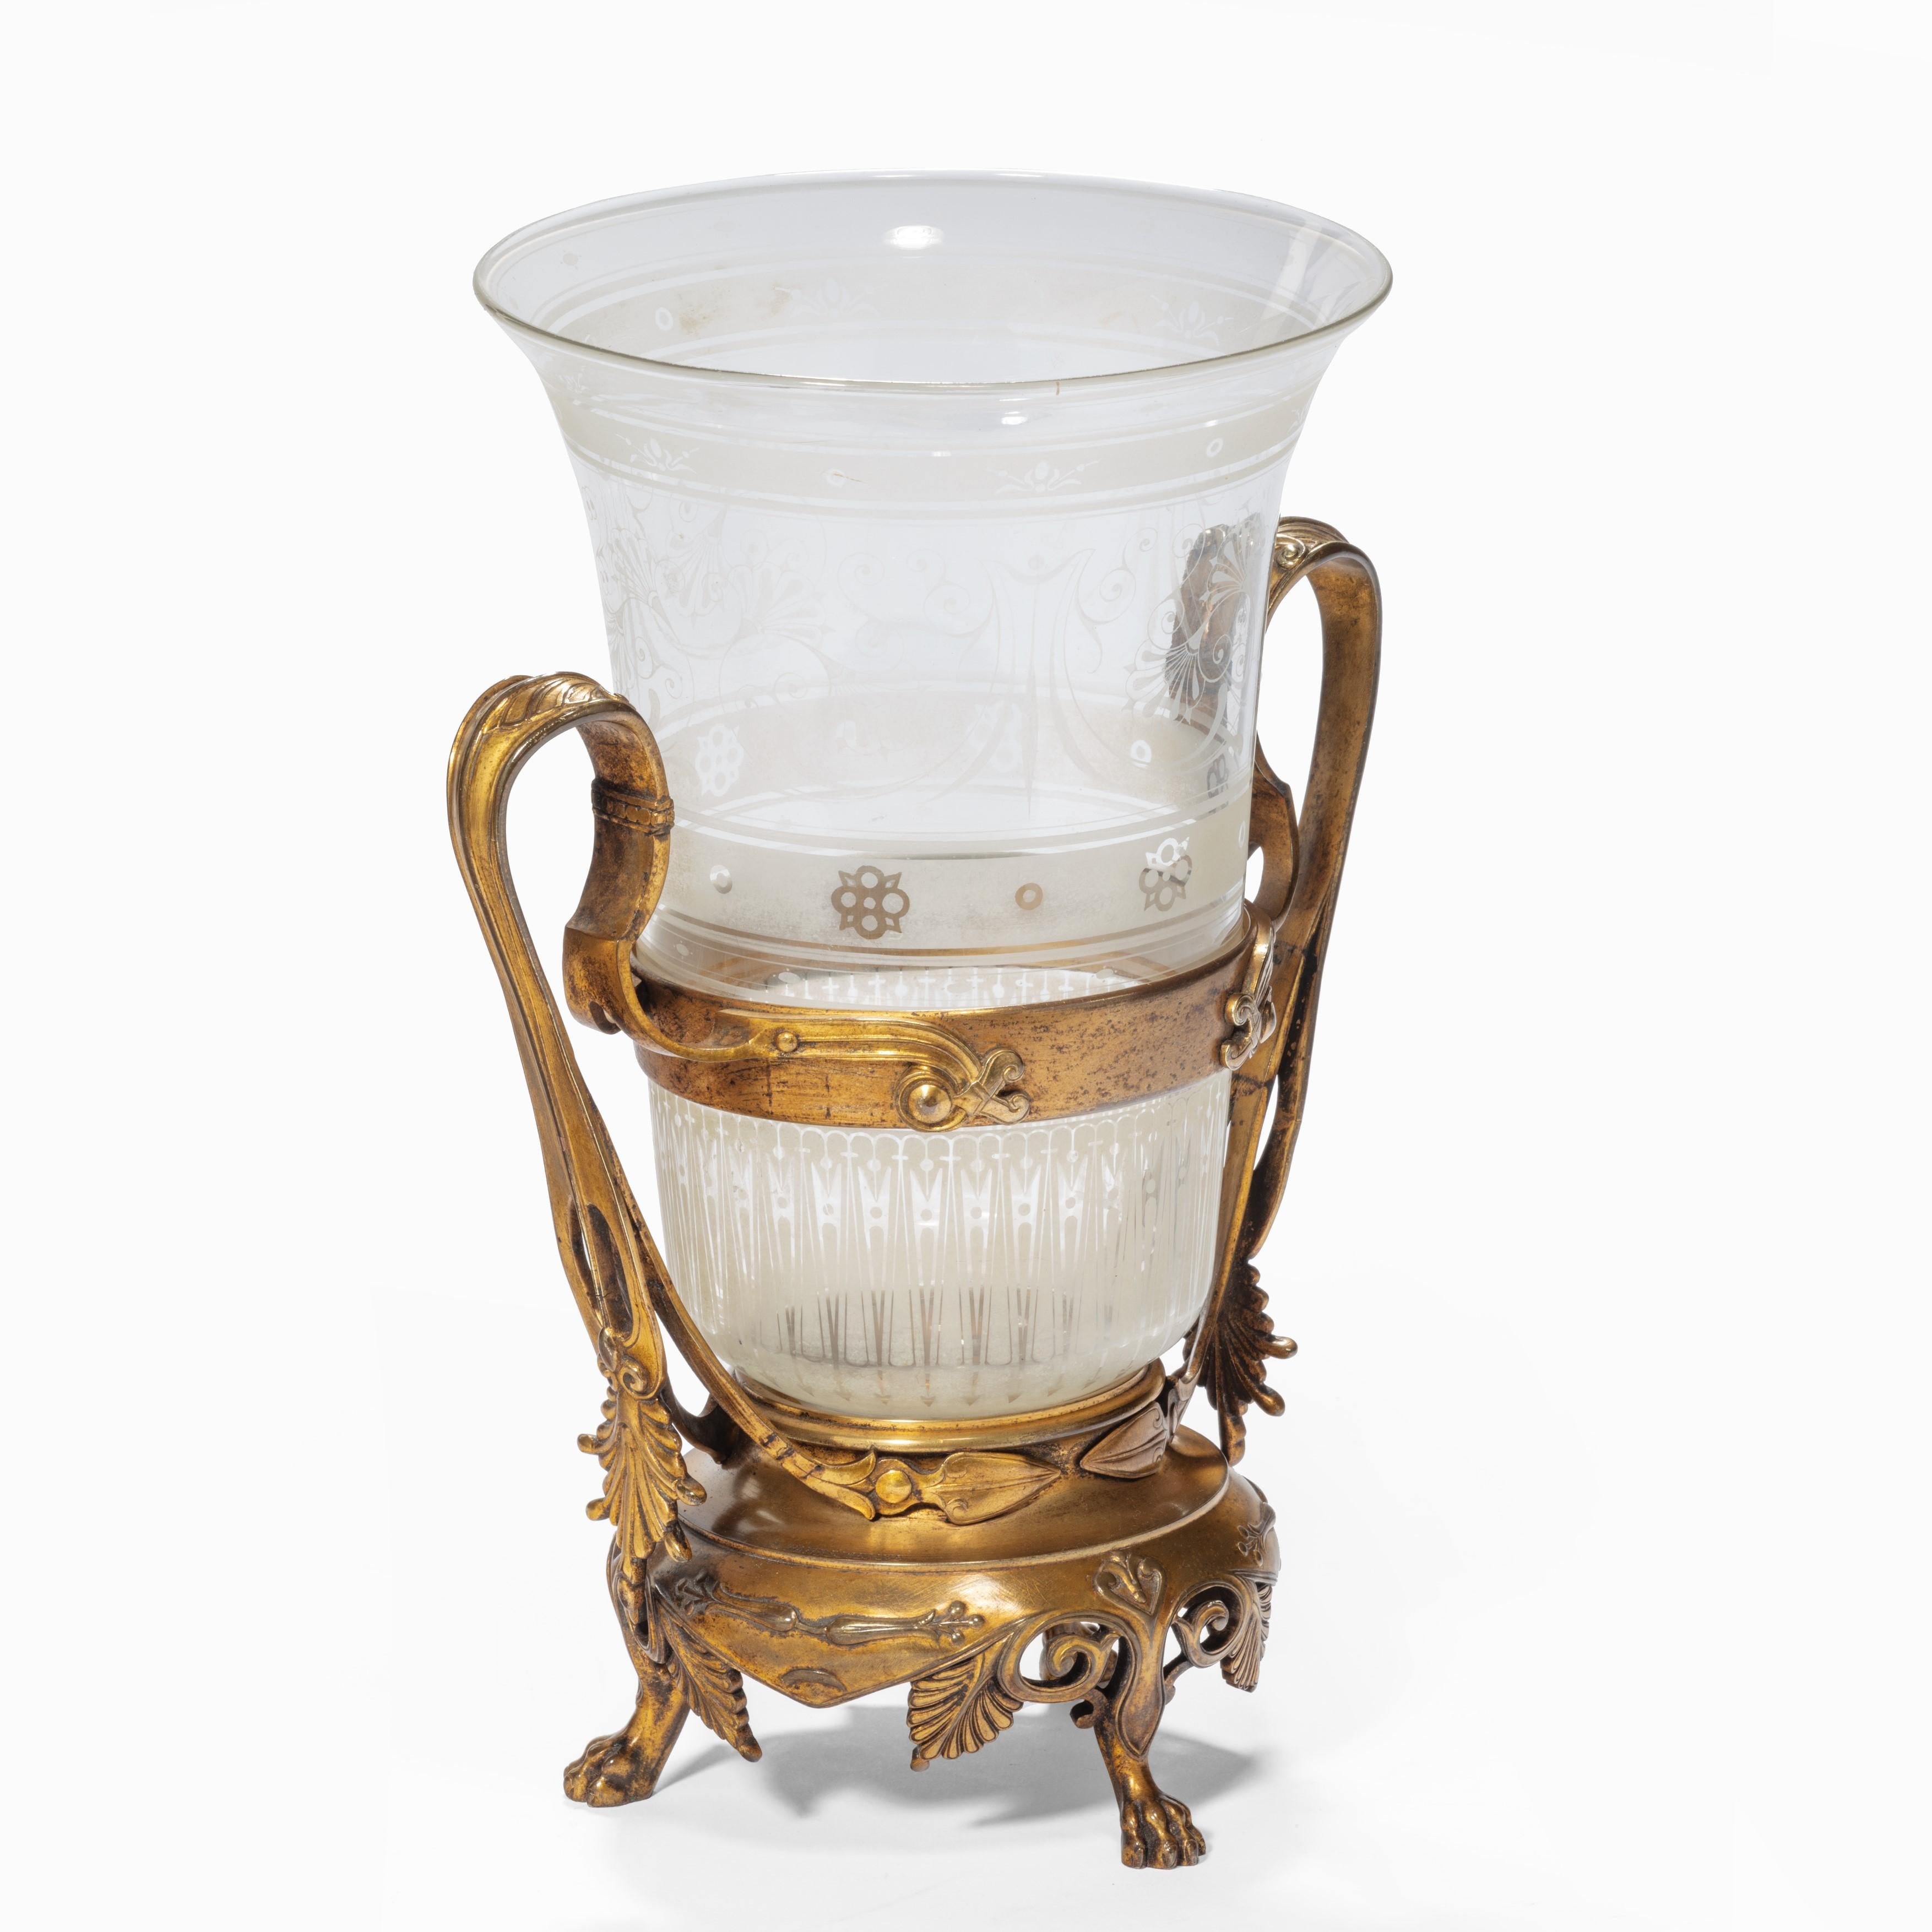 A glass and ormolu vase by the Barbedienne foundry, the flared glass beaker decorated with bands of acid etched stylized floral motifs and lanceolate leaves, the bronze holder with a pair of arched strap handles on a shaped base with three lion’s